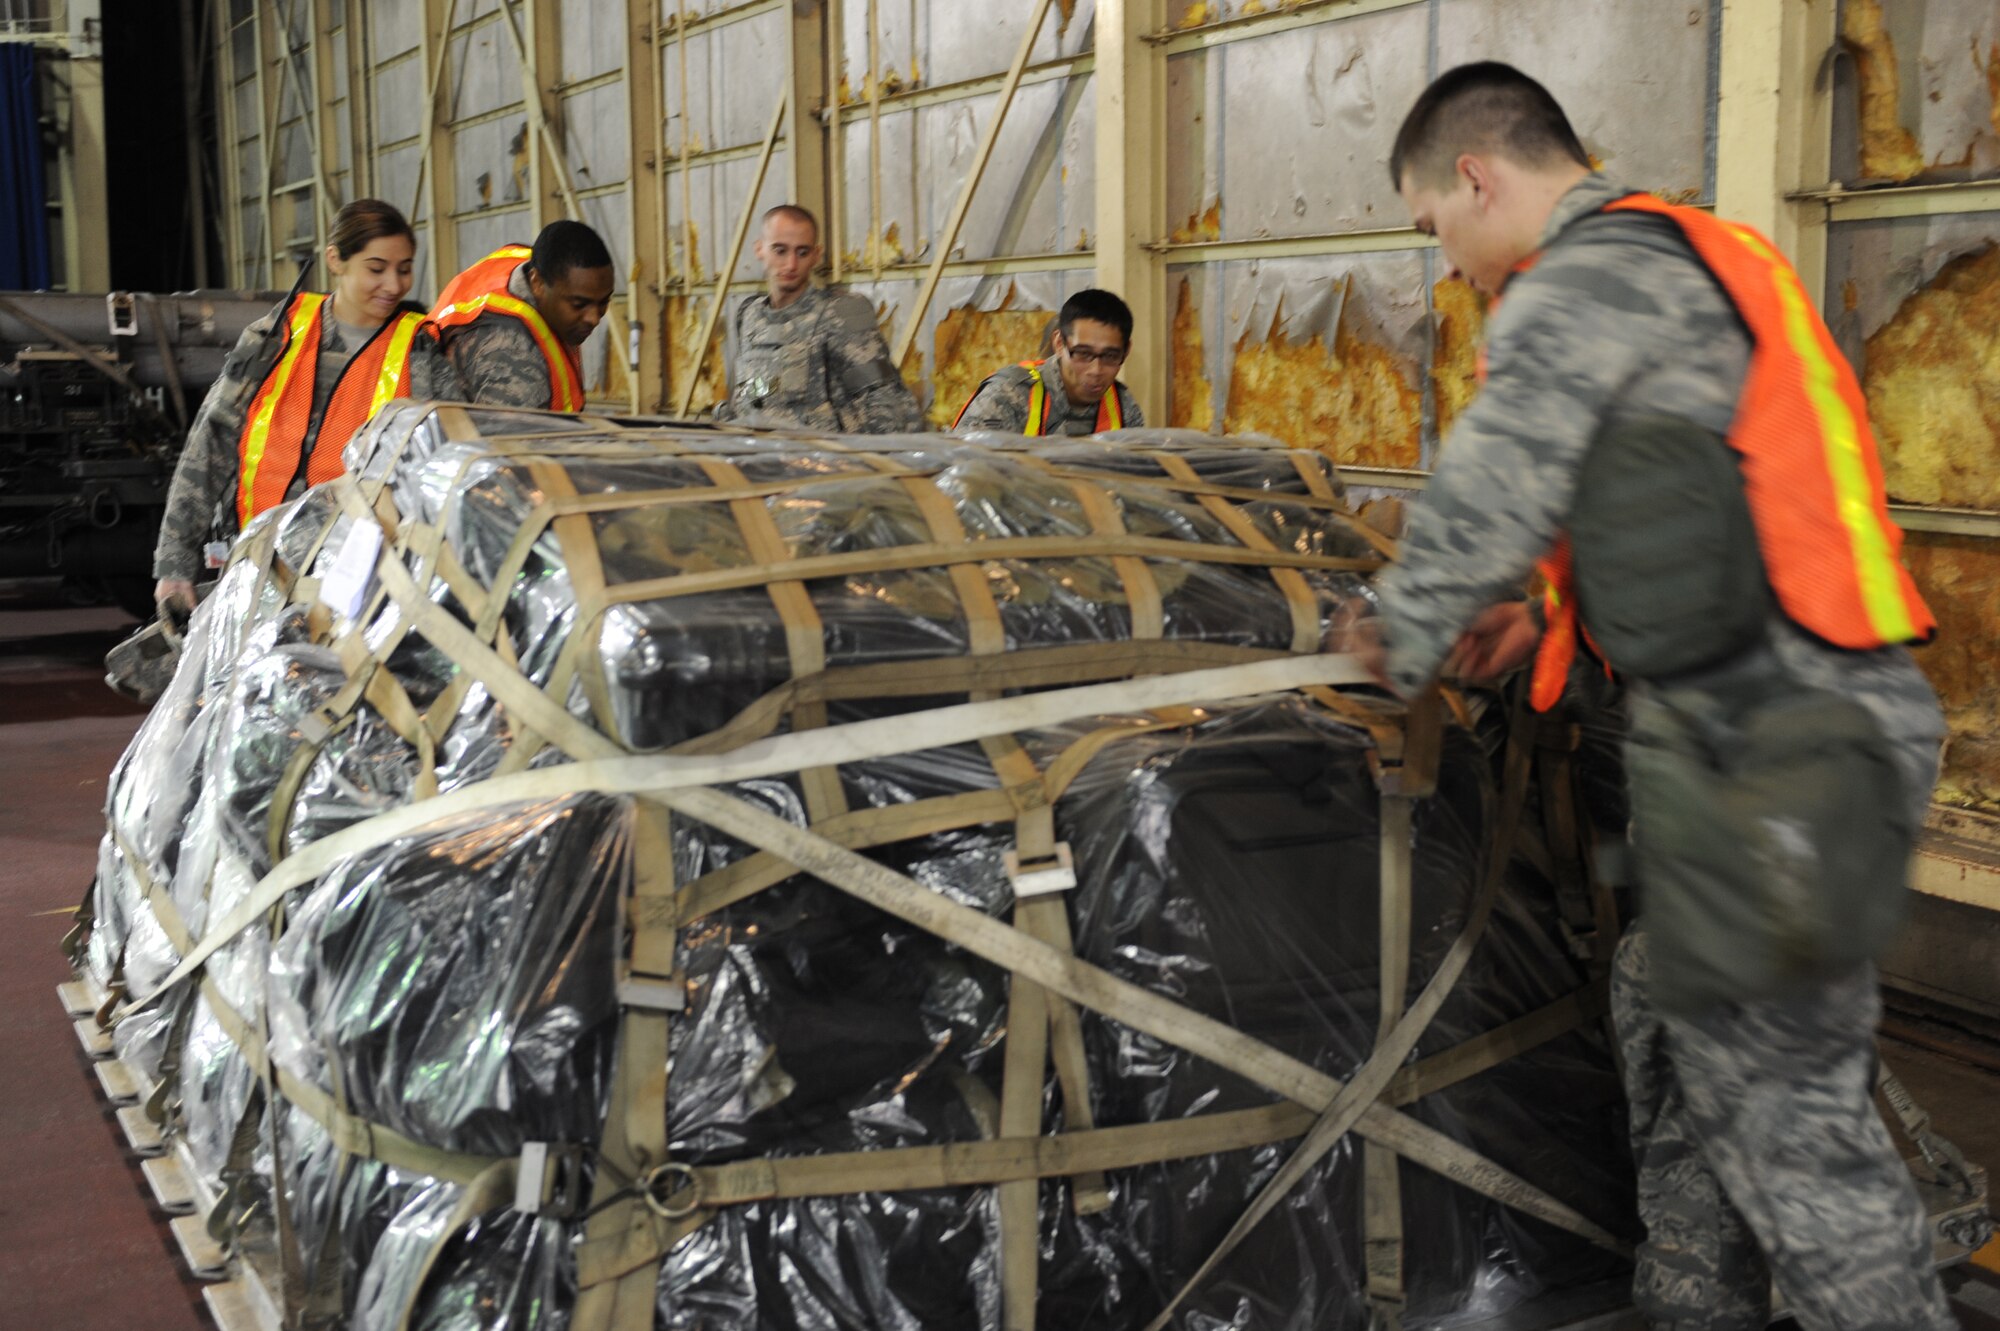 MISAWA AIR BASE, Japan – Members of the 35th Security Forces Squadron inspect cargo during an operational readiness exercise here Nov. 6. The 35th Fighter Wing is preparing for an operational readiness inspection in December. (U.S. Air Force photo by Airman 1st Class Kia Atkins)